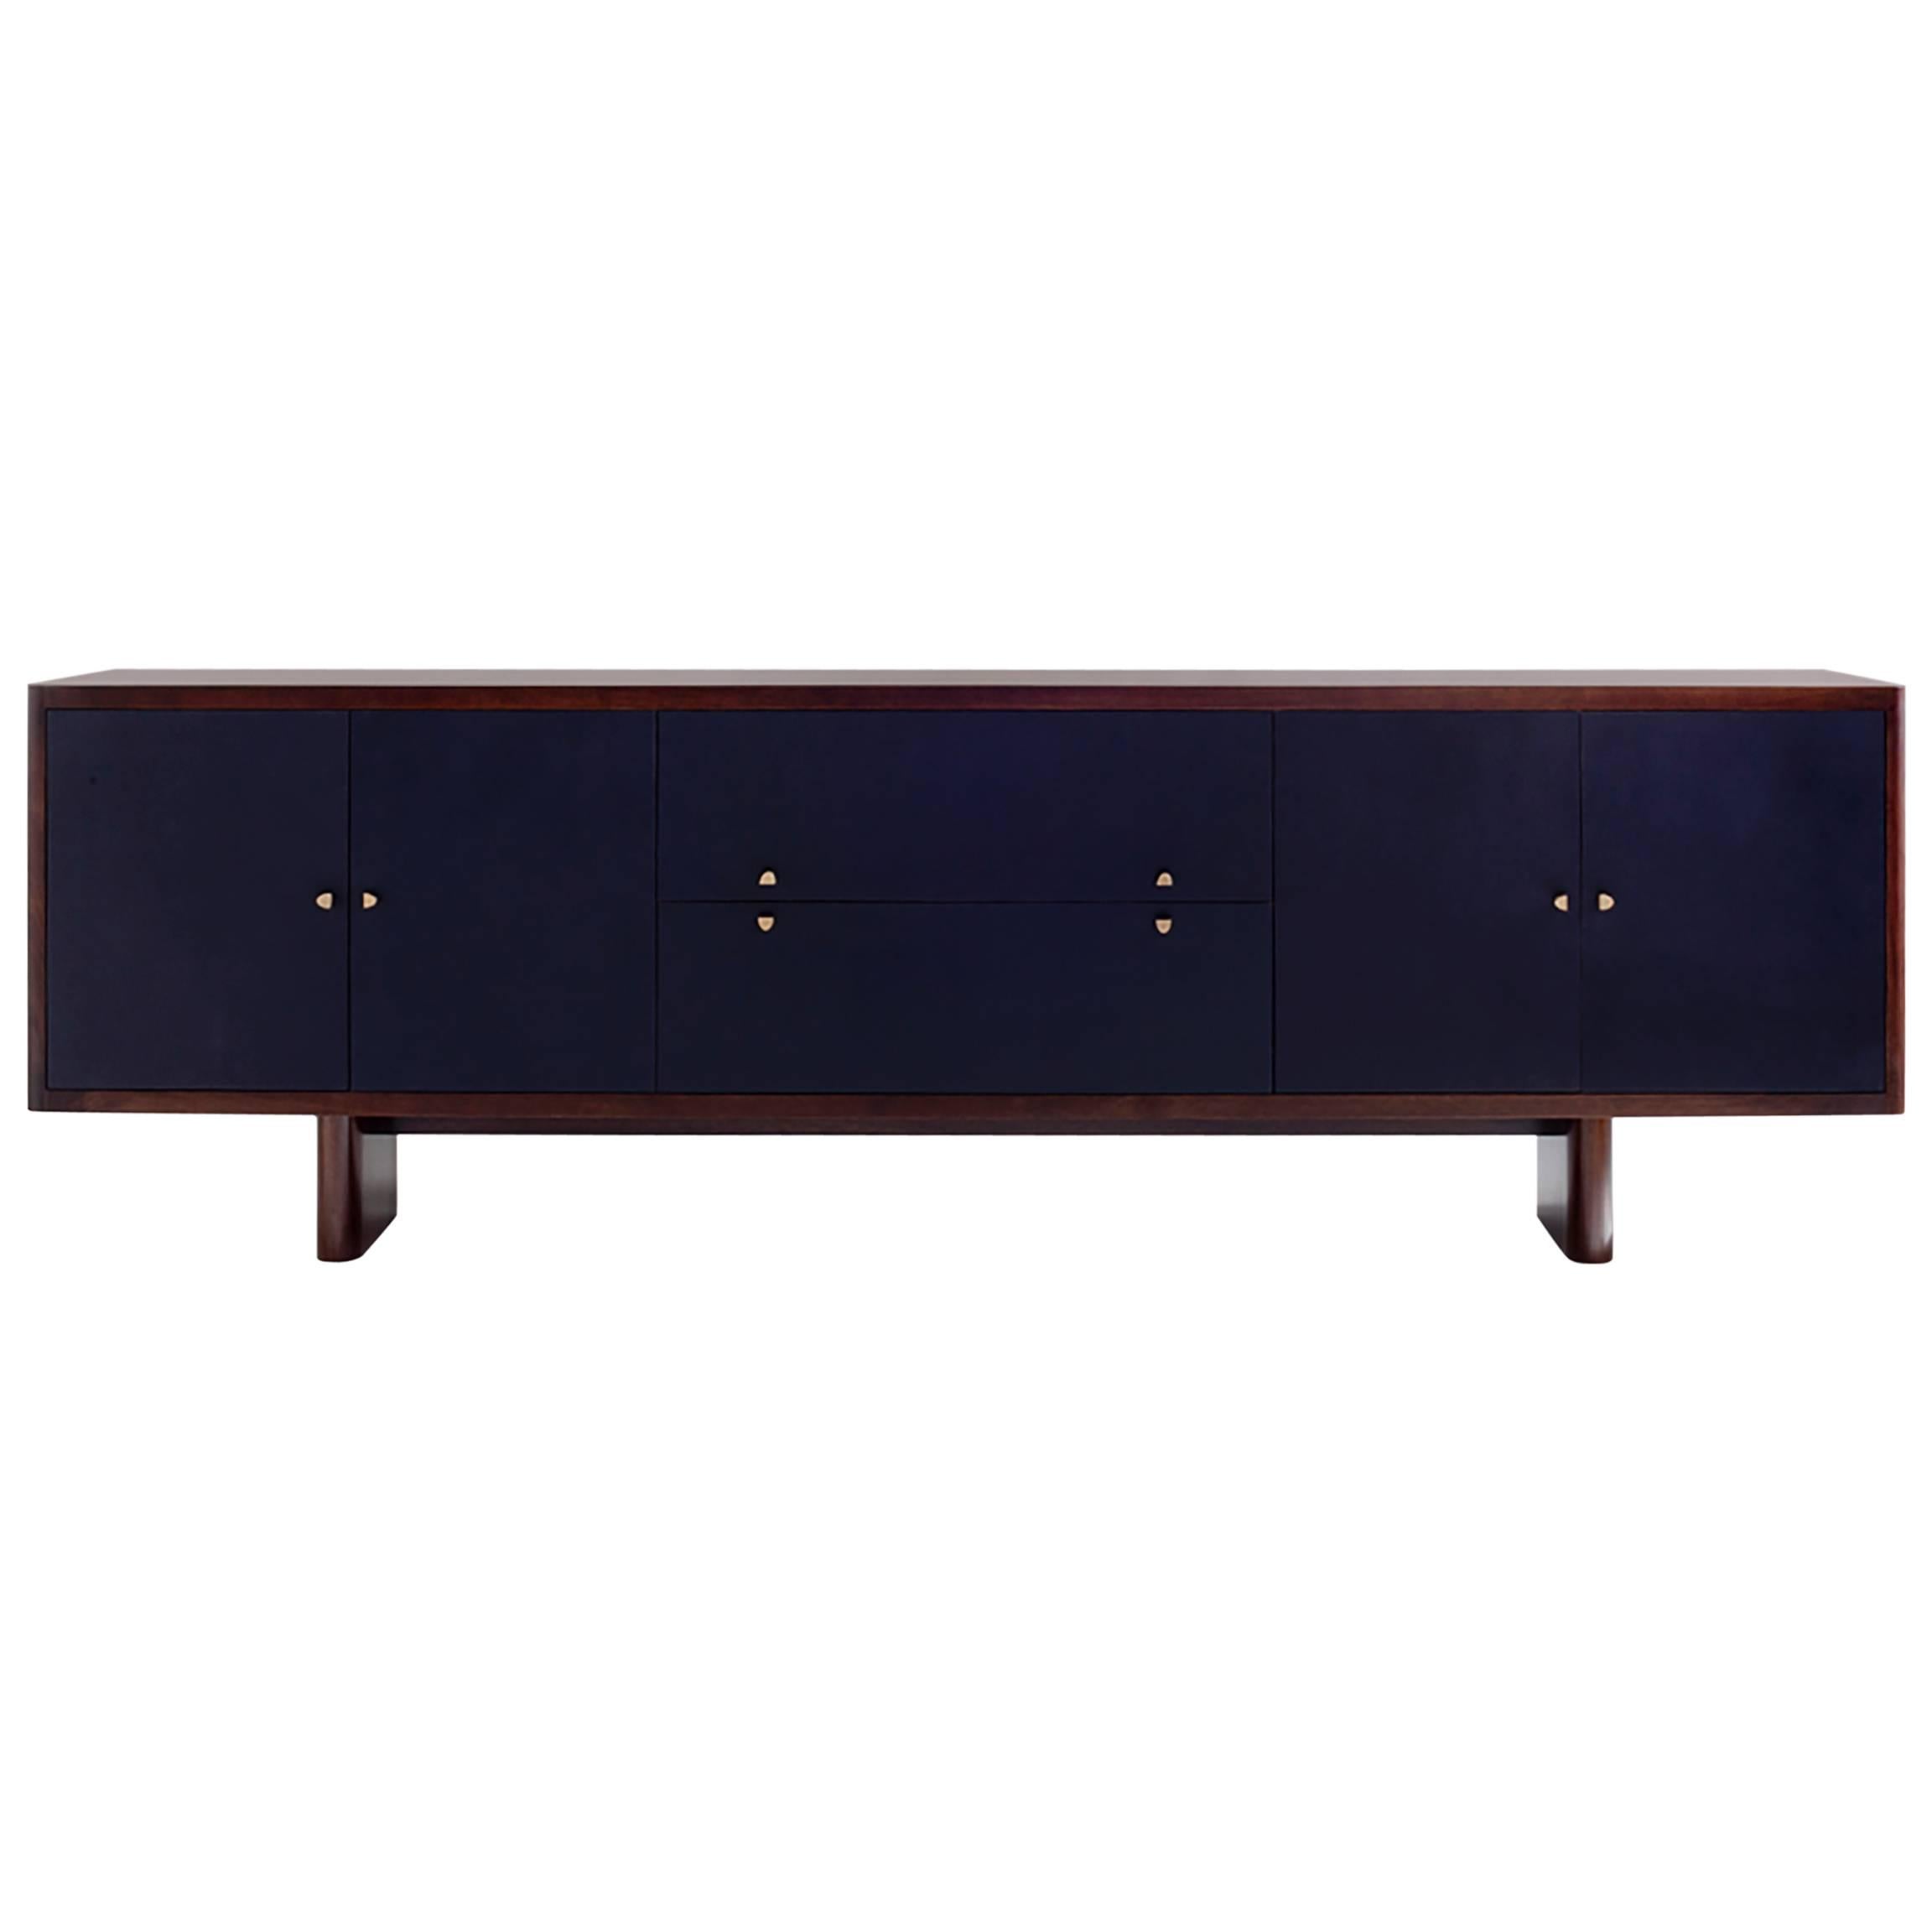 96" Turner Sideboard, Solid Wood and Leather For Sale